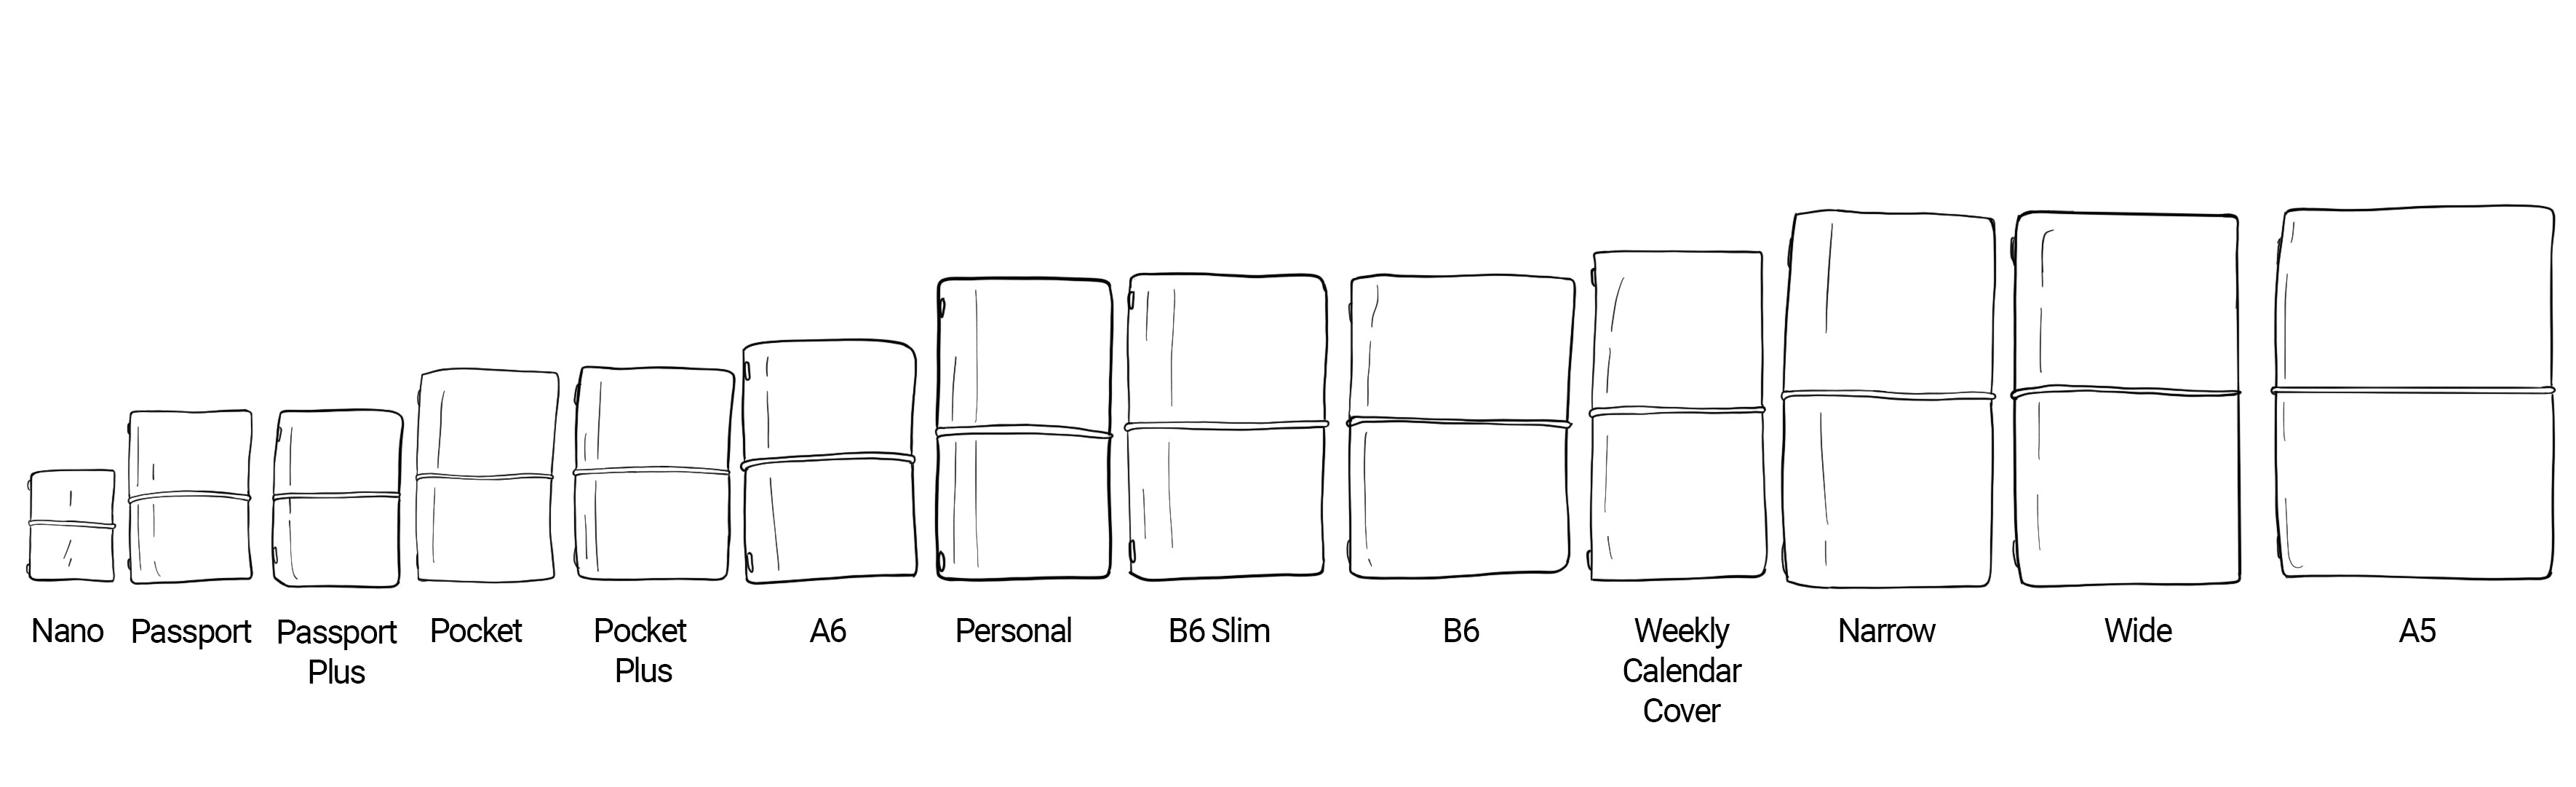 Notebook Cover Size Chart